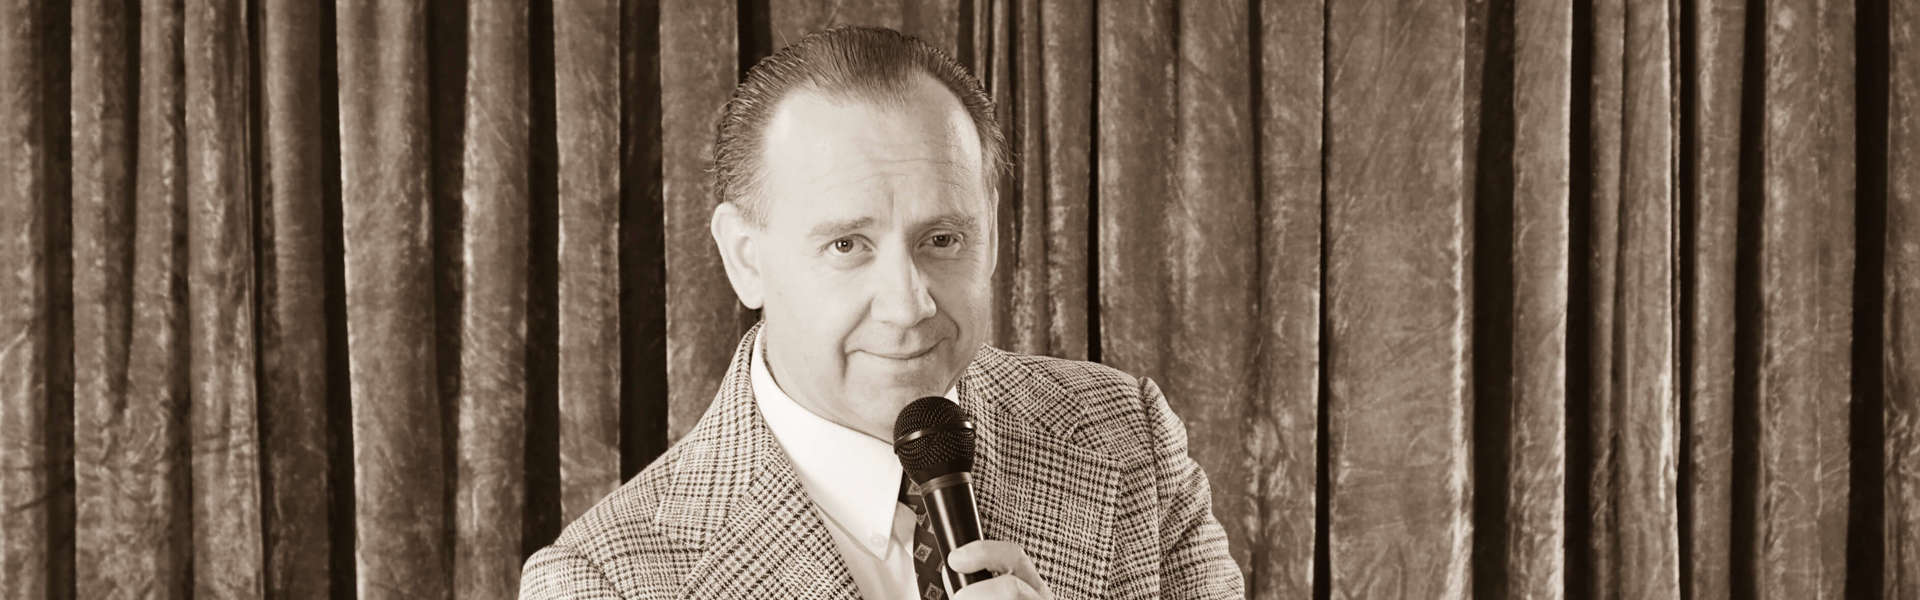 A sepia toned photo of quiz master David Mustoe holding a microphone in one hand and a card with question marks in the other